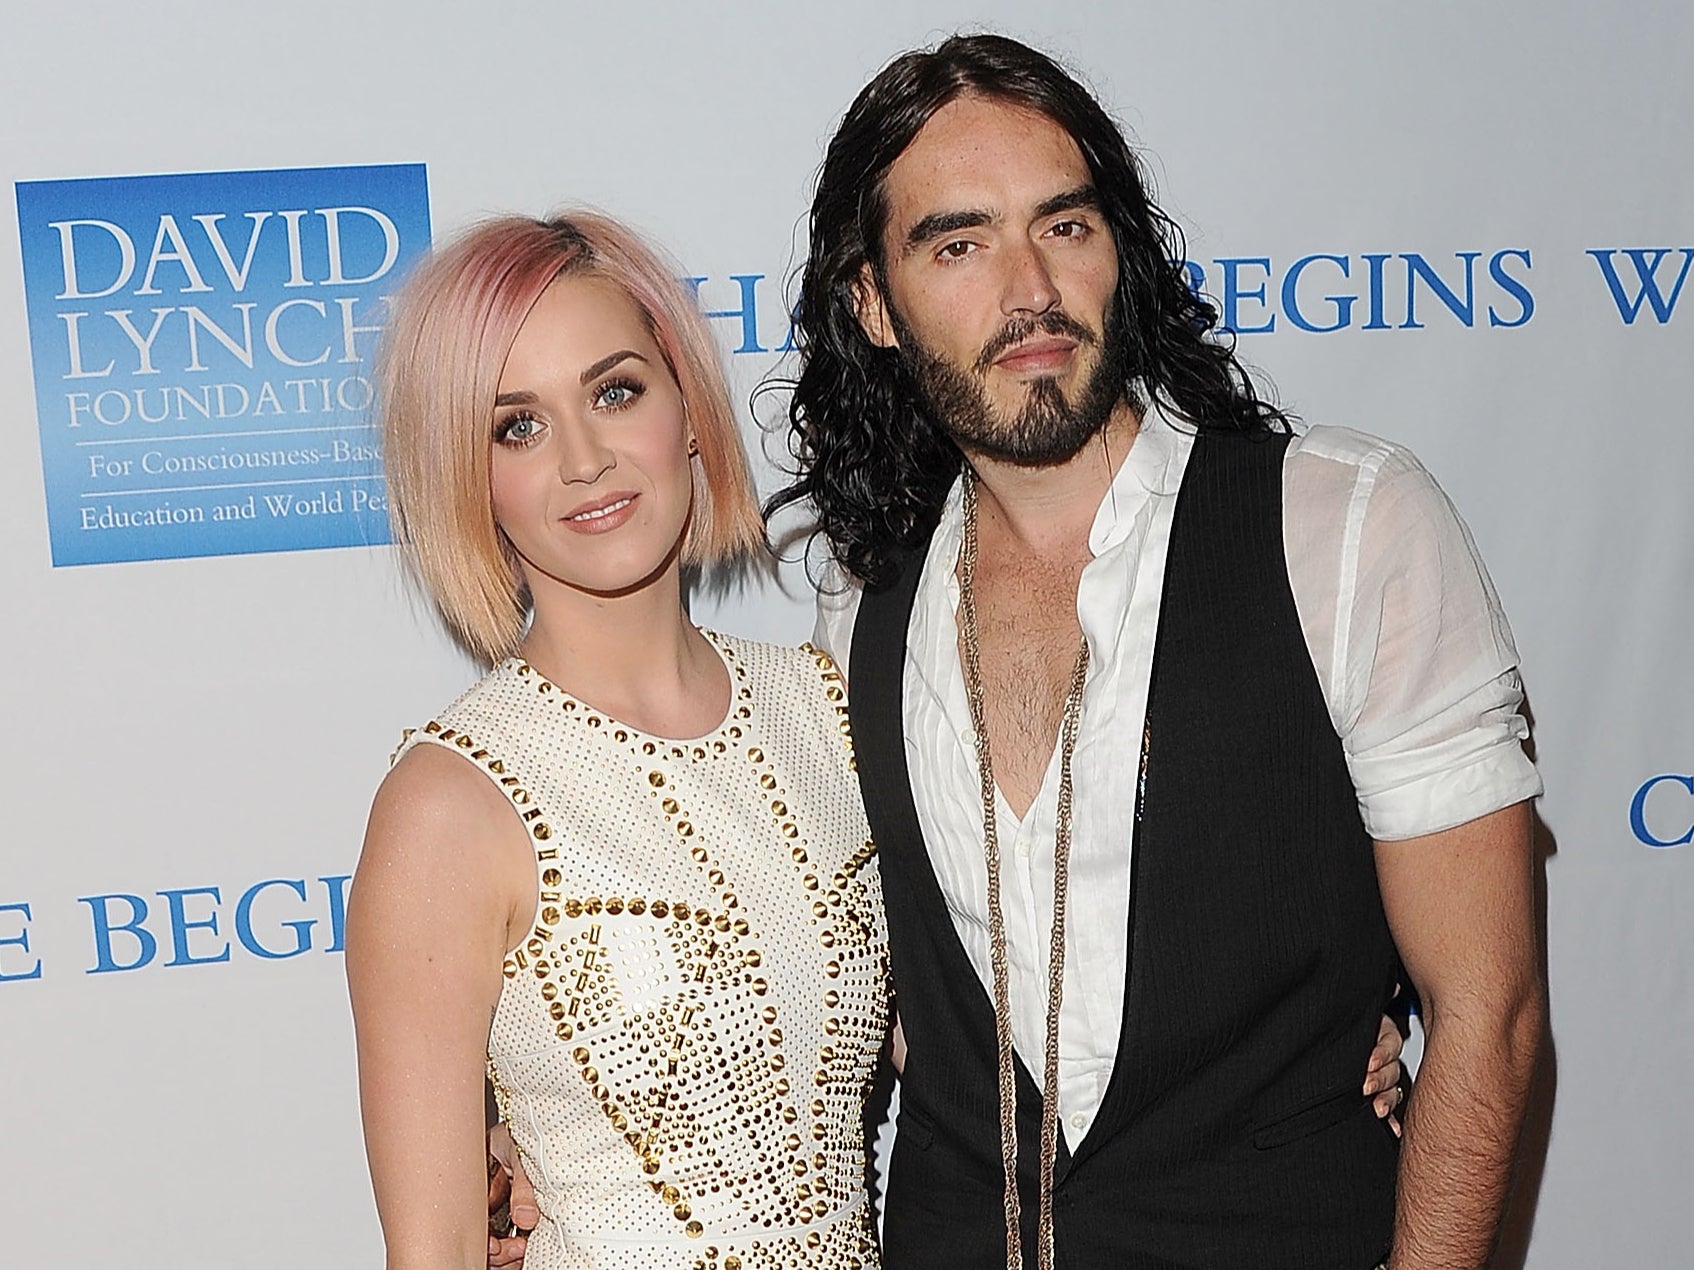 Brand was married to Katy Perry in 2010